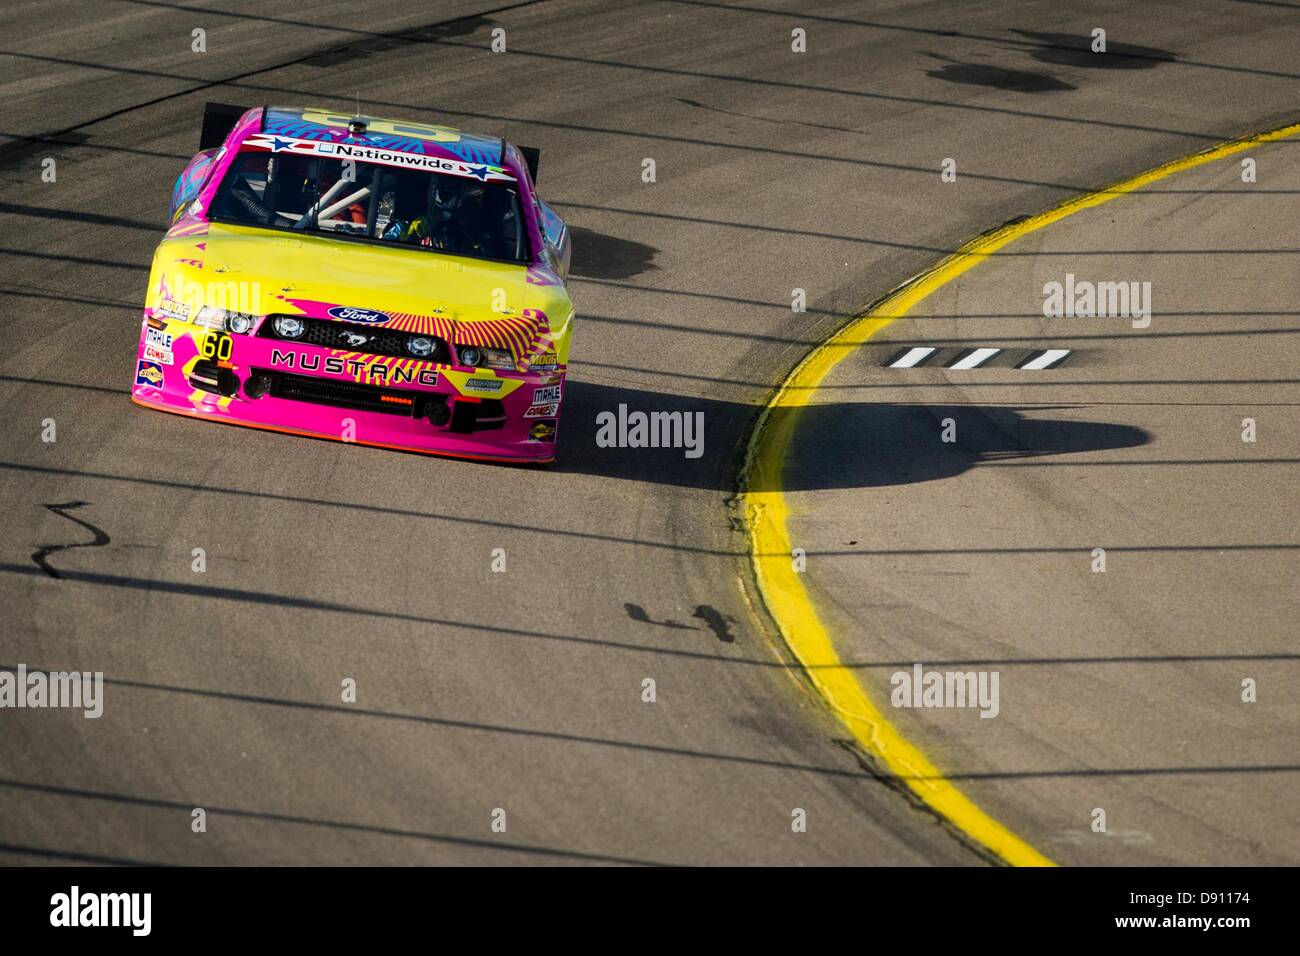 Newton, IA, USA. June 7th, 2013. Travis Pastrana (60) takes to the track during practice for the Pioneer Hi-Bred 250 at the Iowa Speedway in Newton, IA. Credit:  Cal Sport Media/Alamy Live News Stock Photo